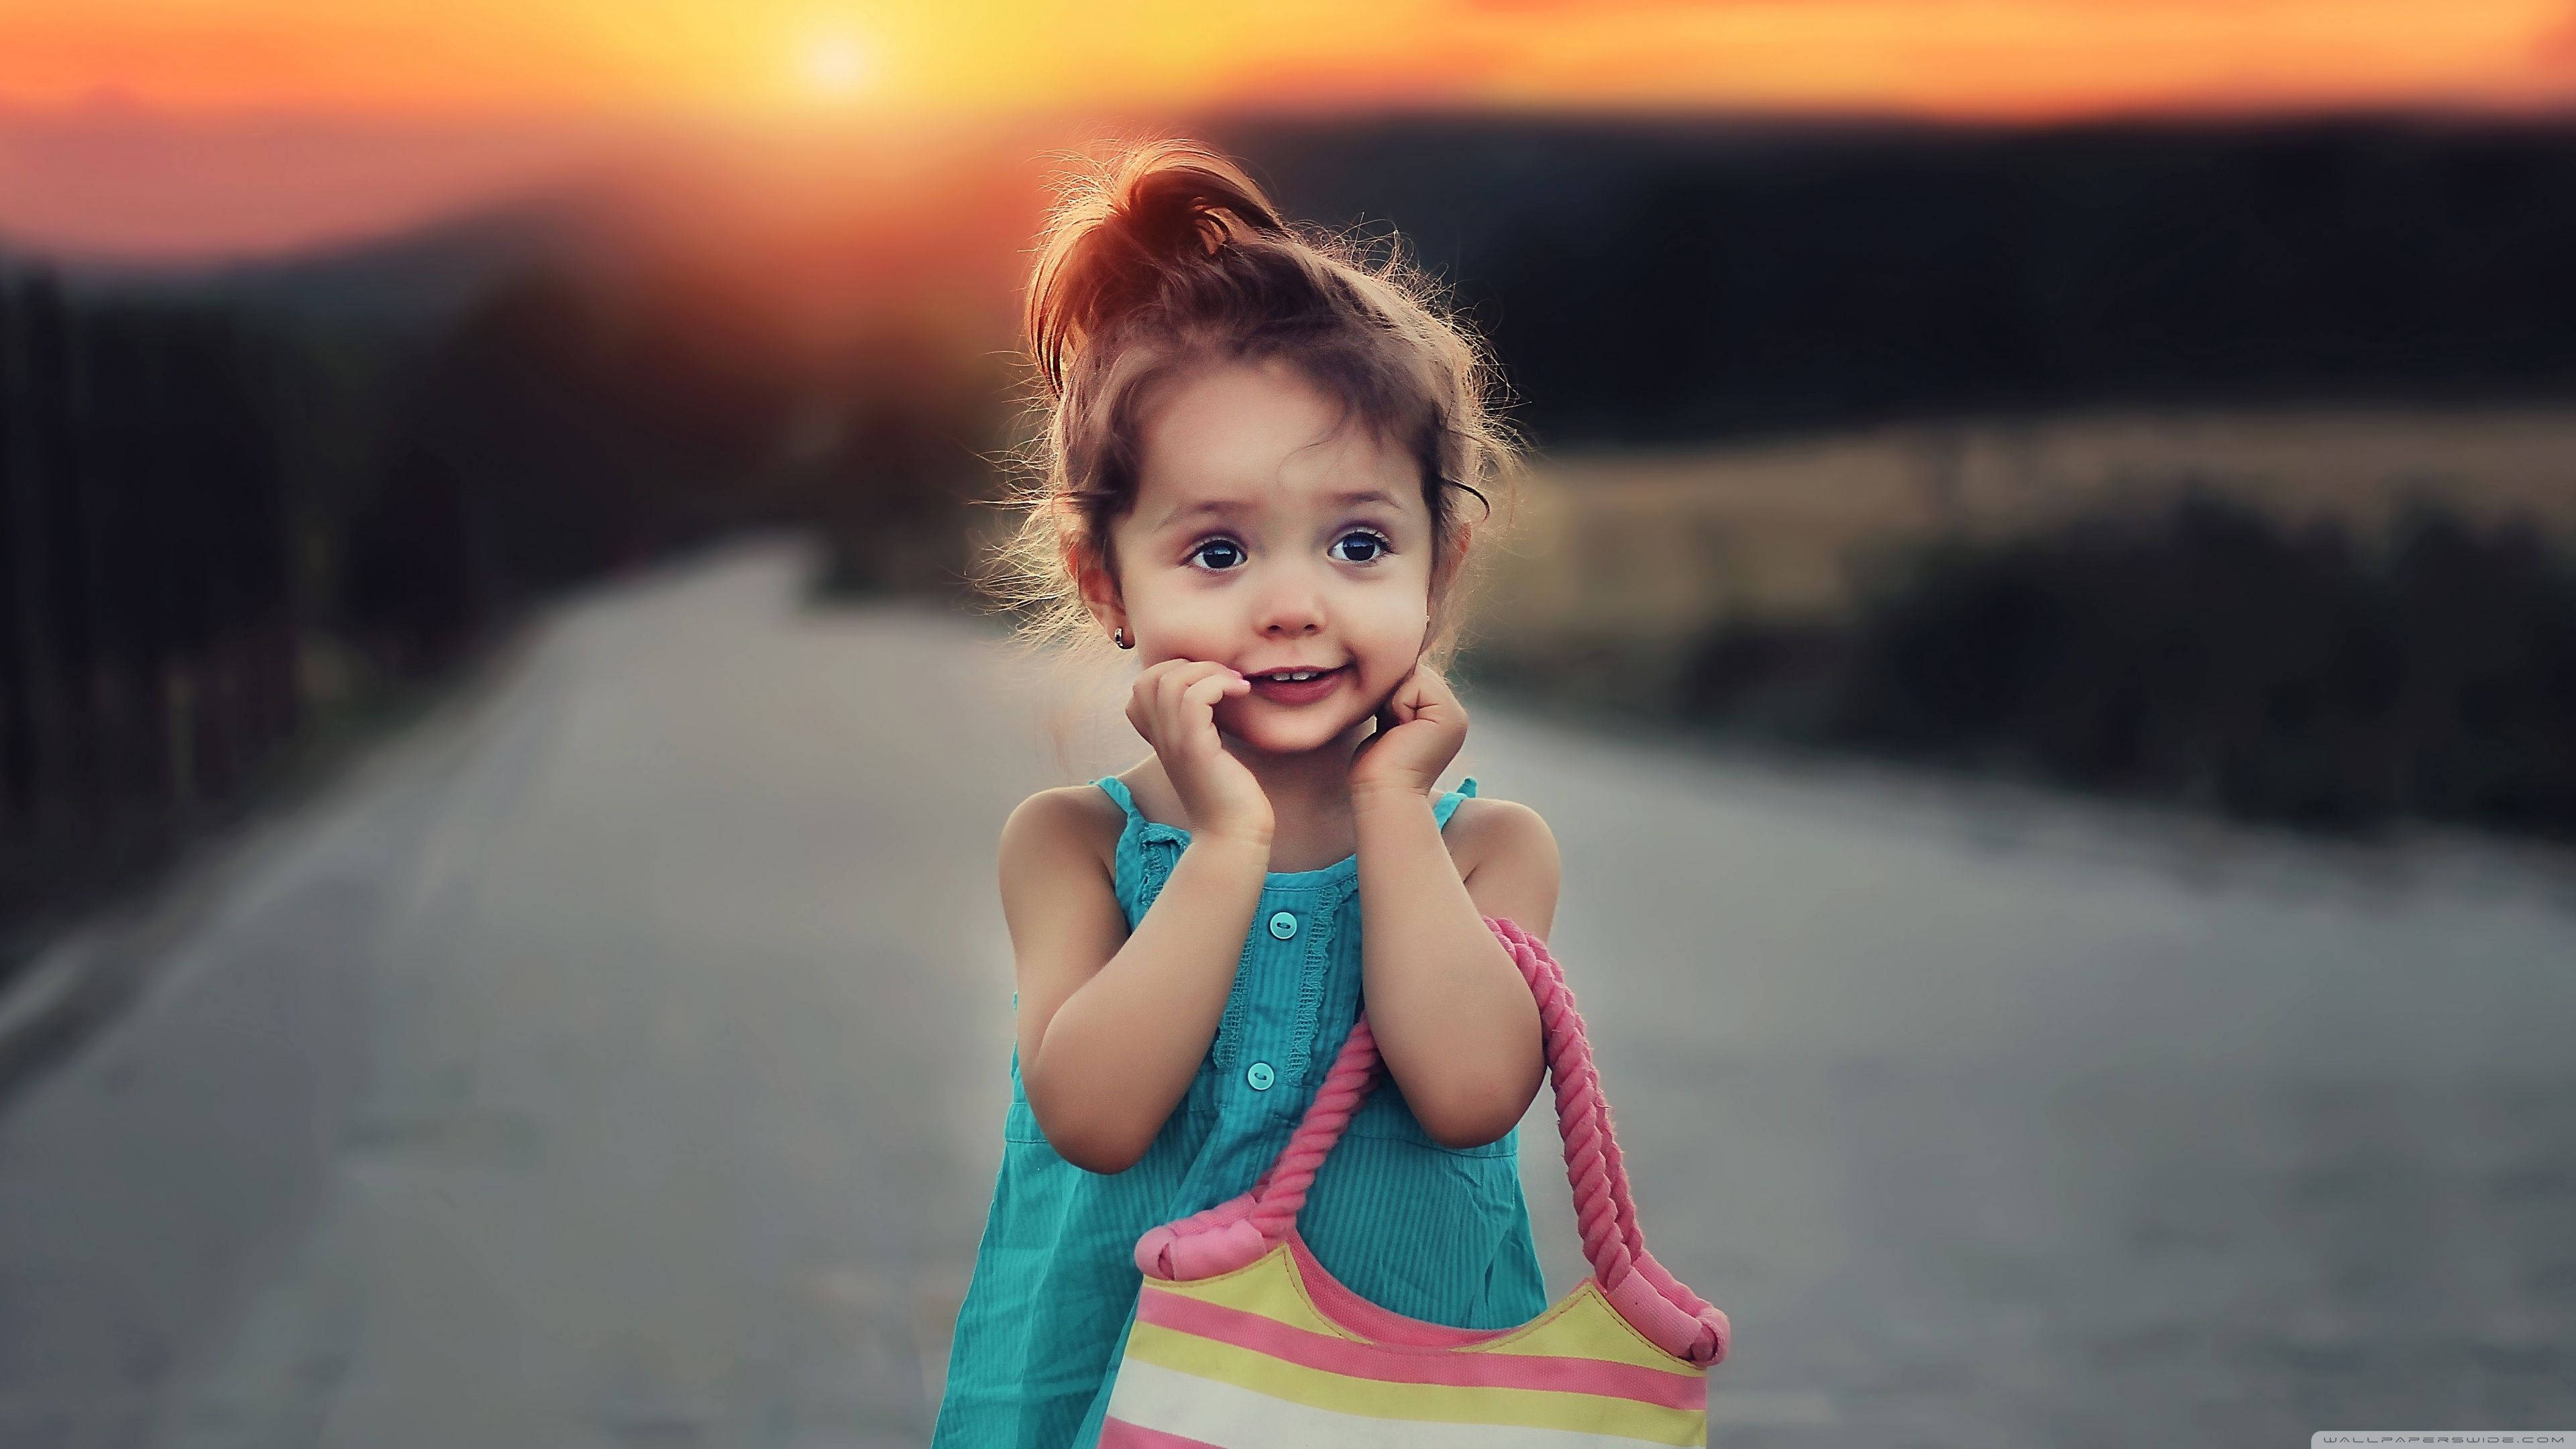 Adorable Pose Of Baby Love Wallpaper